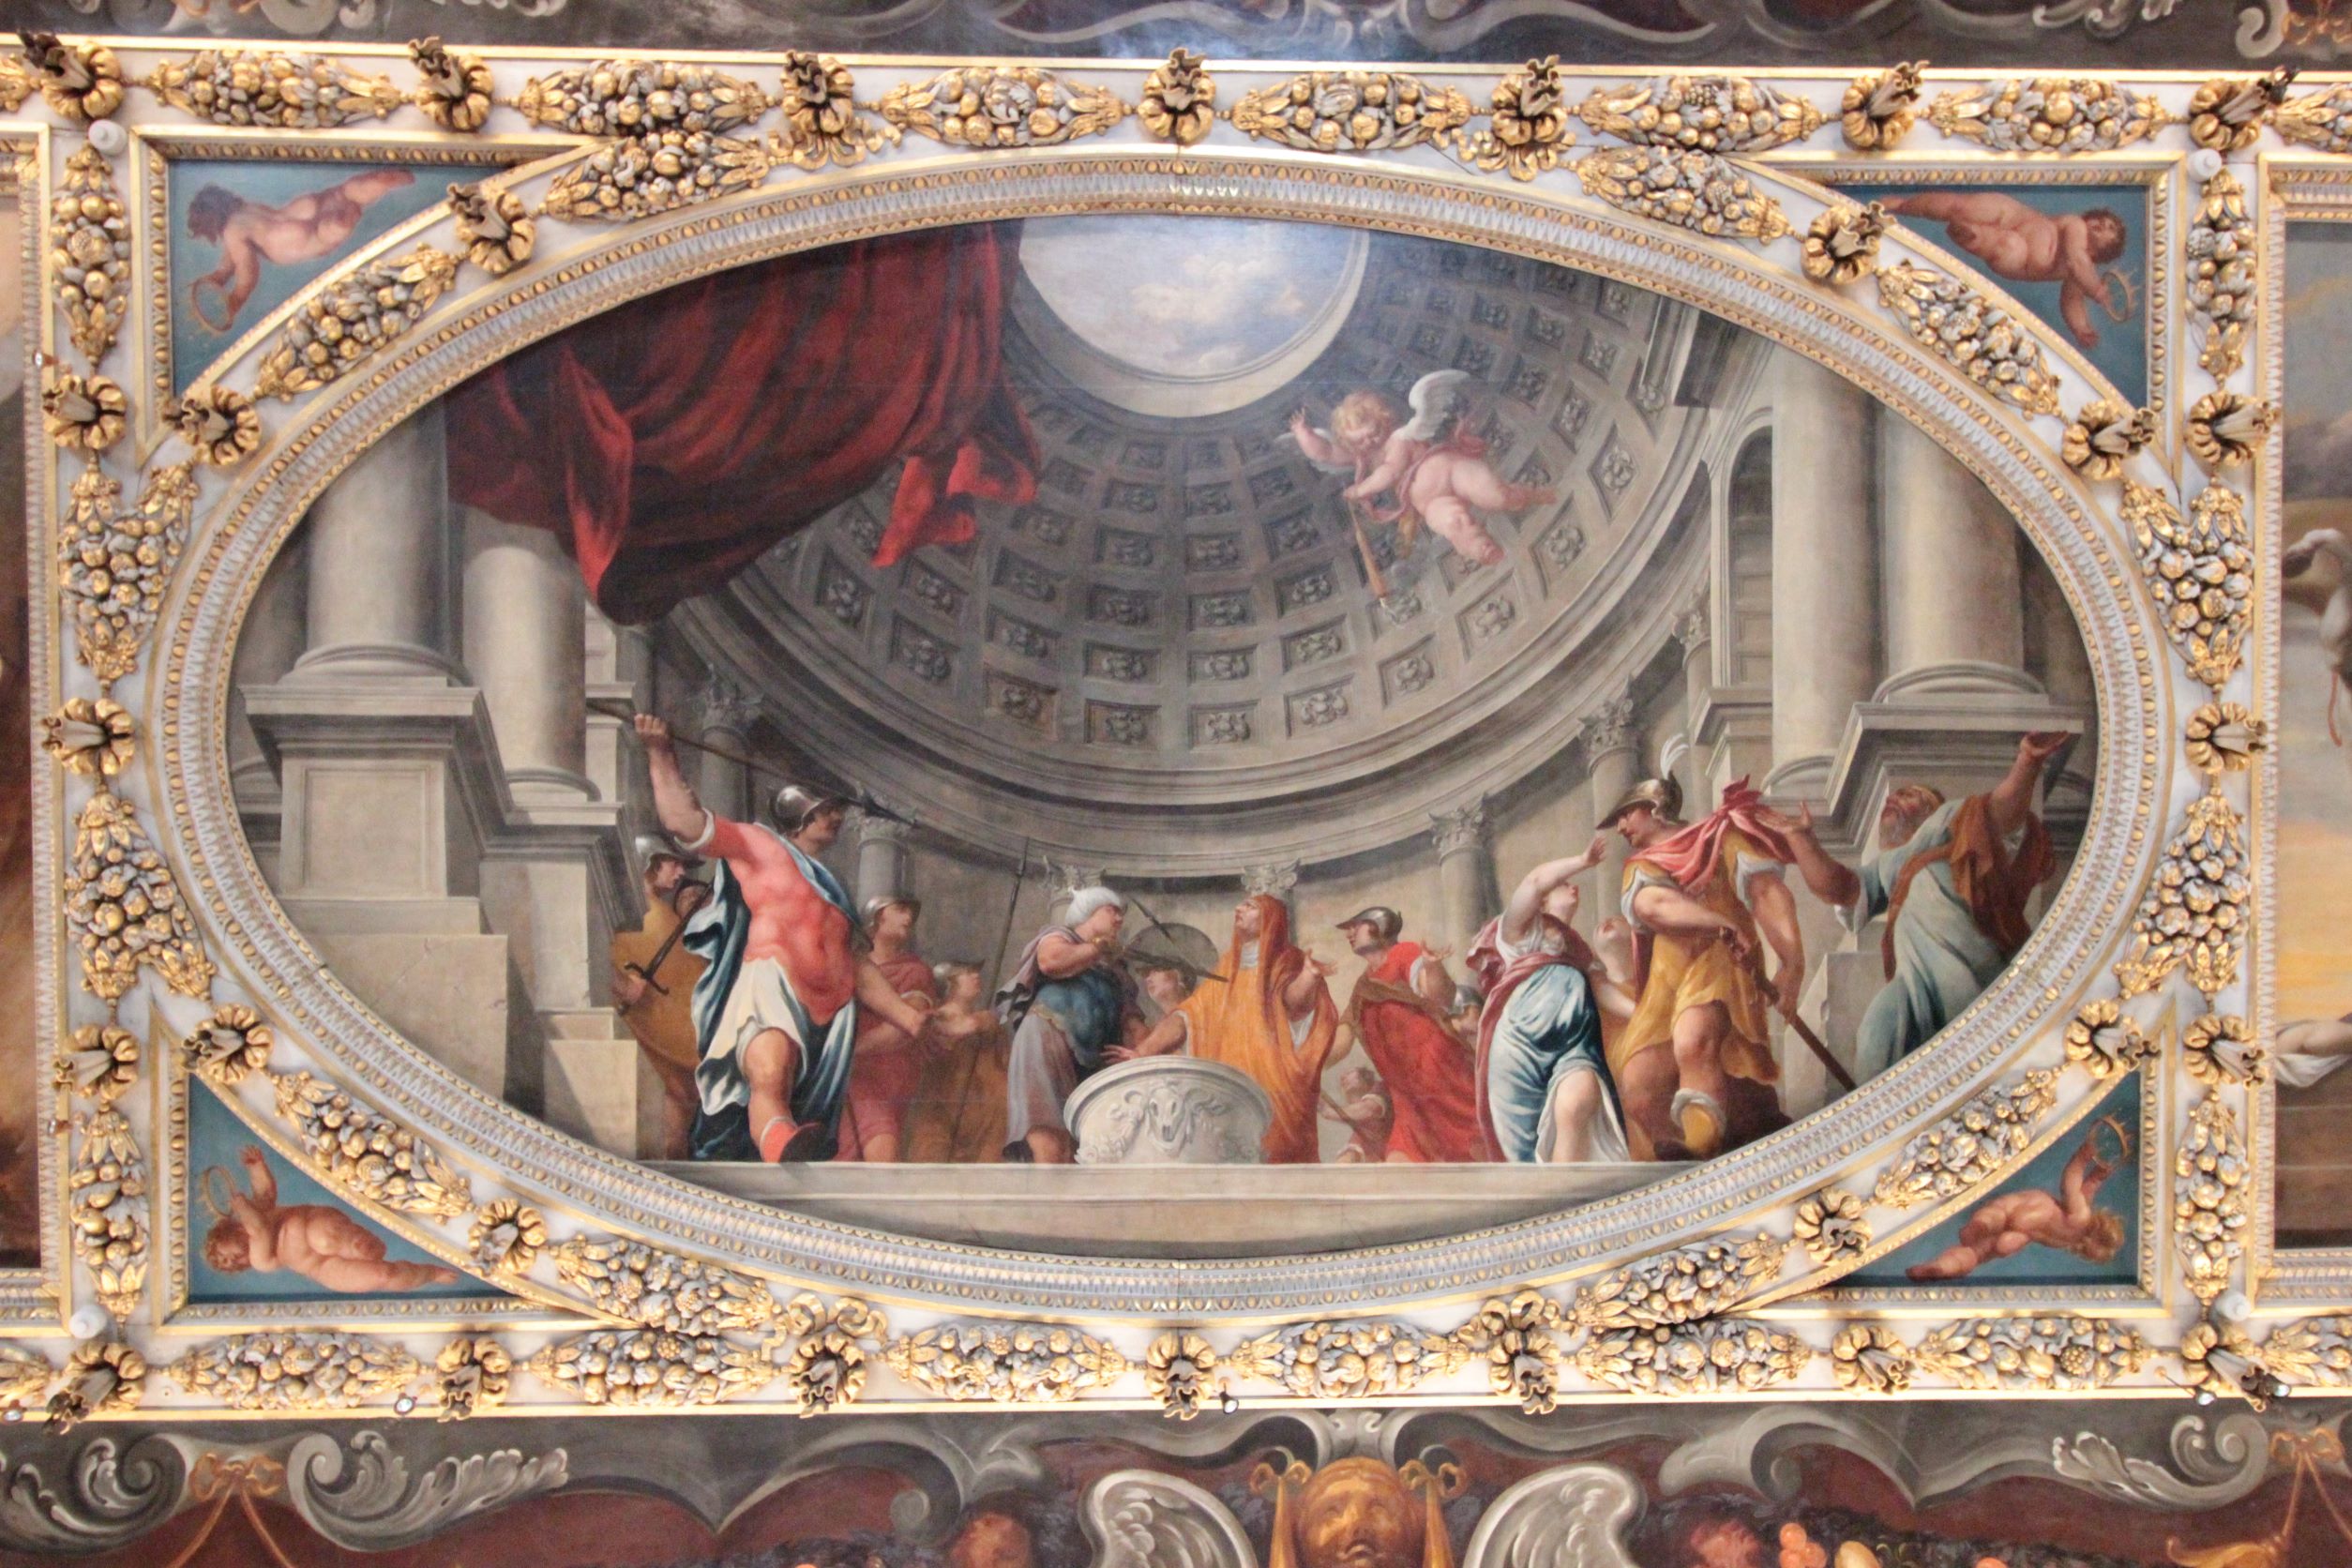 an oval ceiling painting in an ornamental frame, featuring multiple mythological figures